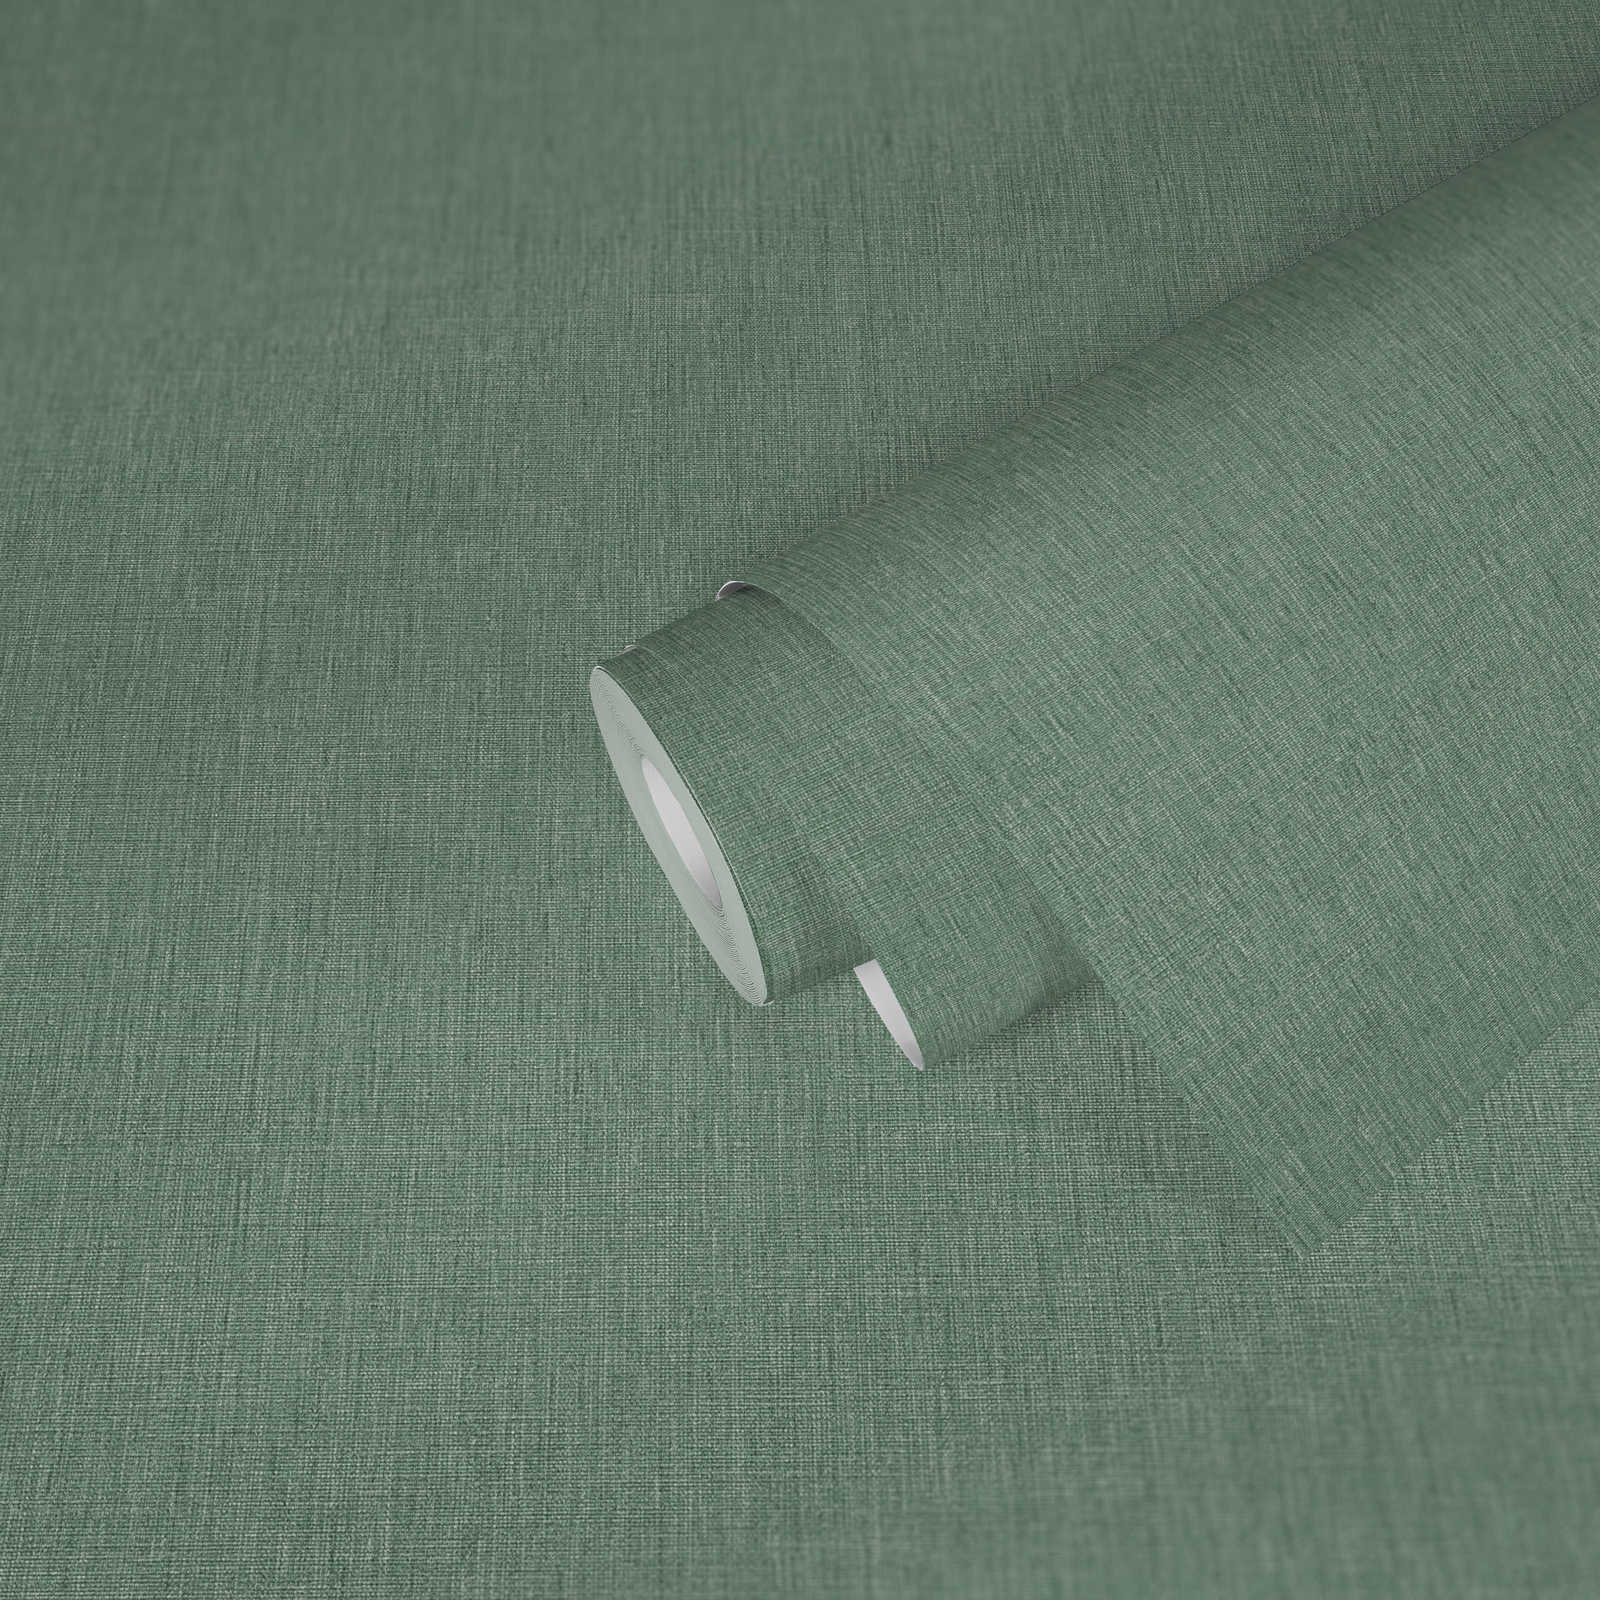             Plain wallpaper in textile look with texture - green
        